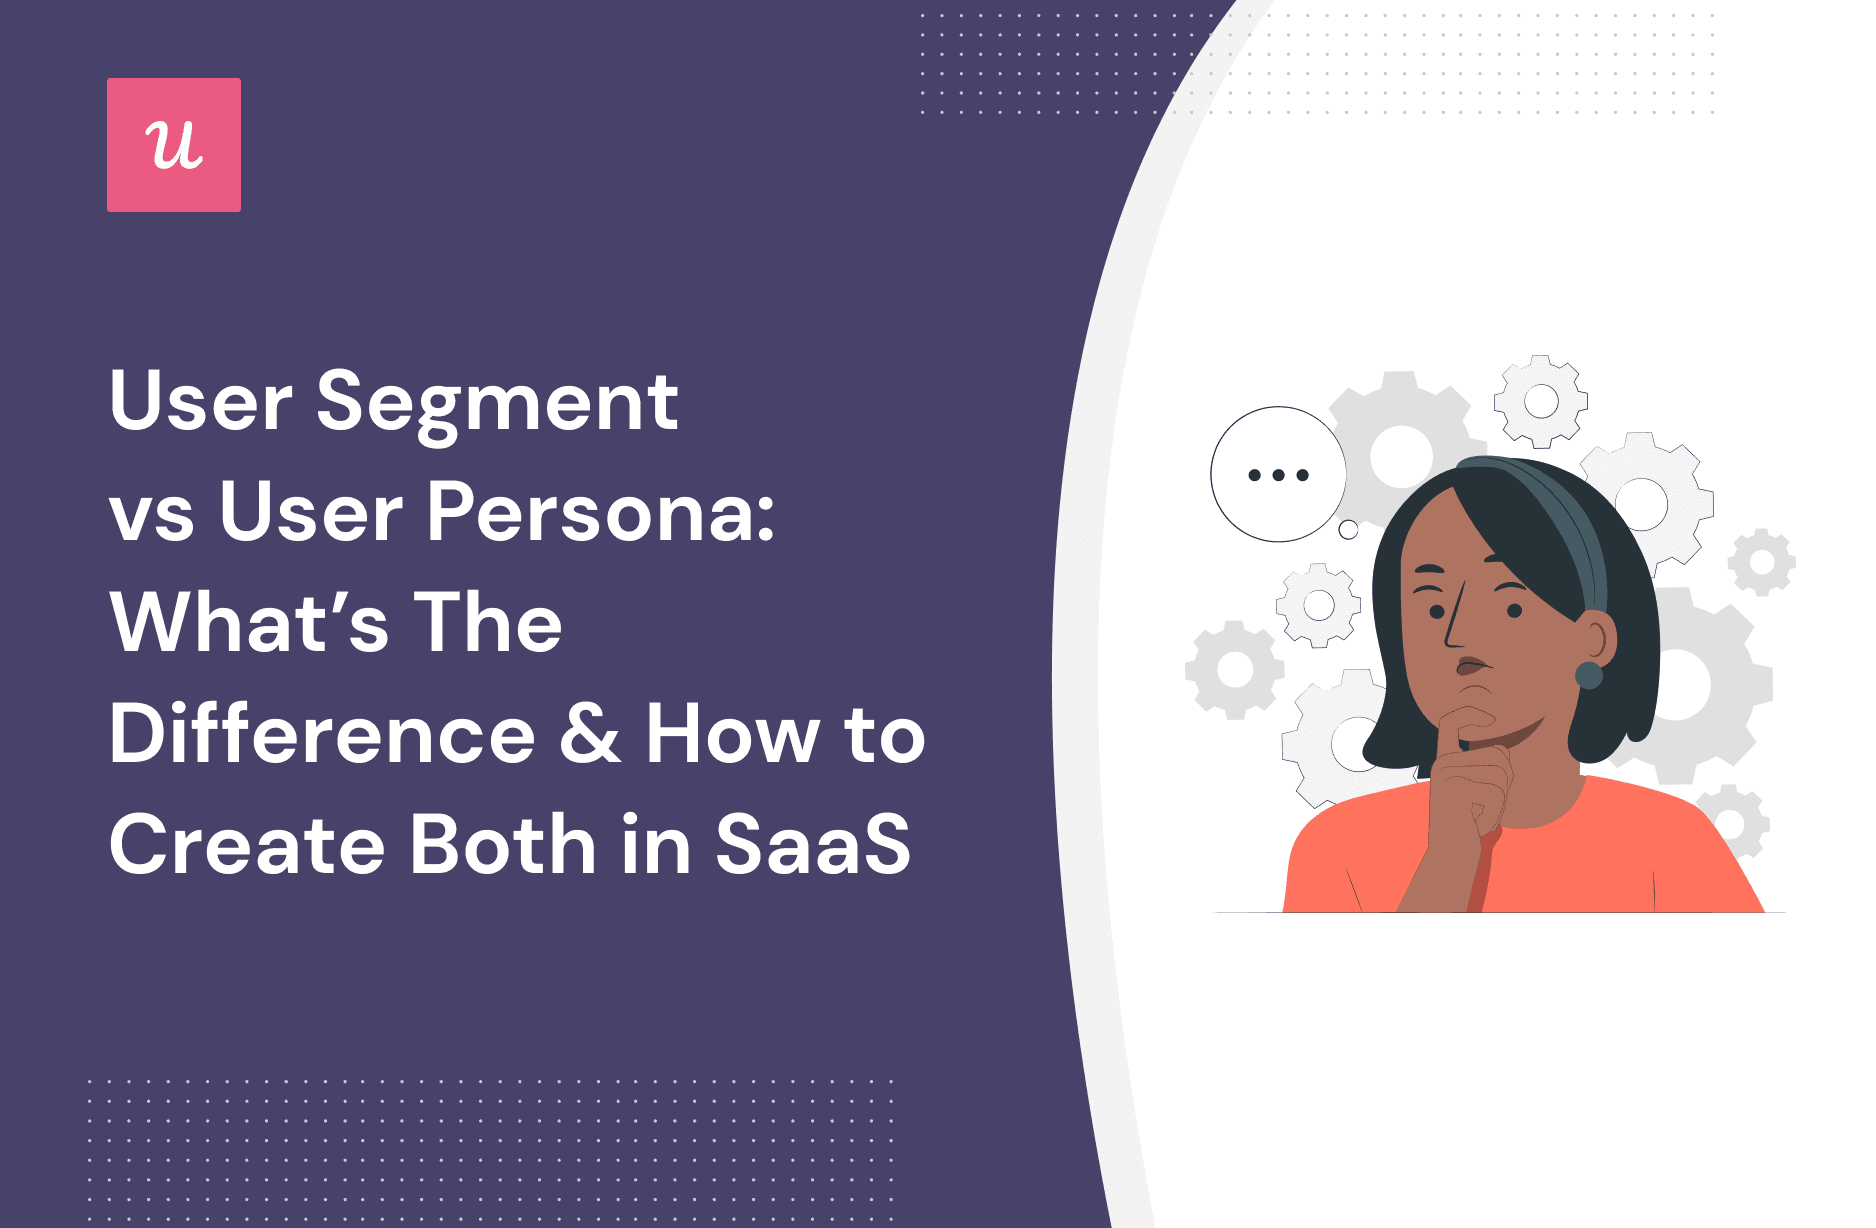 User Segment vs User Persona: What’s the Difference & How To Create Both in SaaS cover